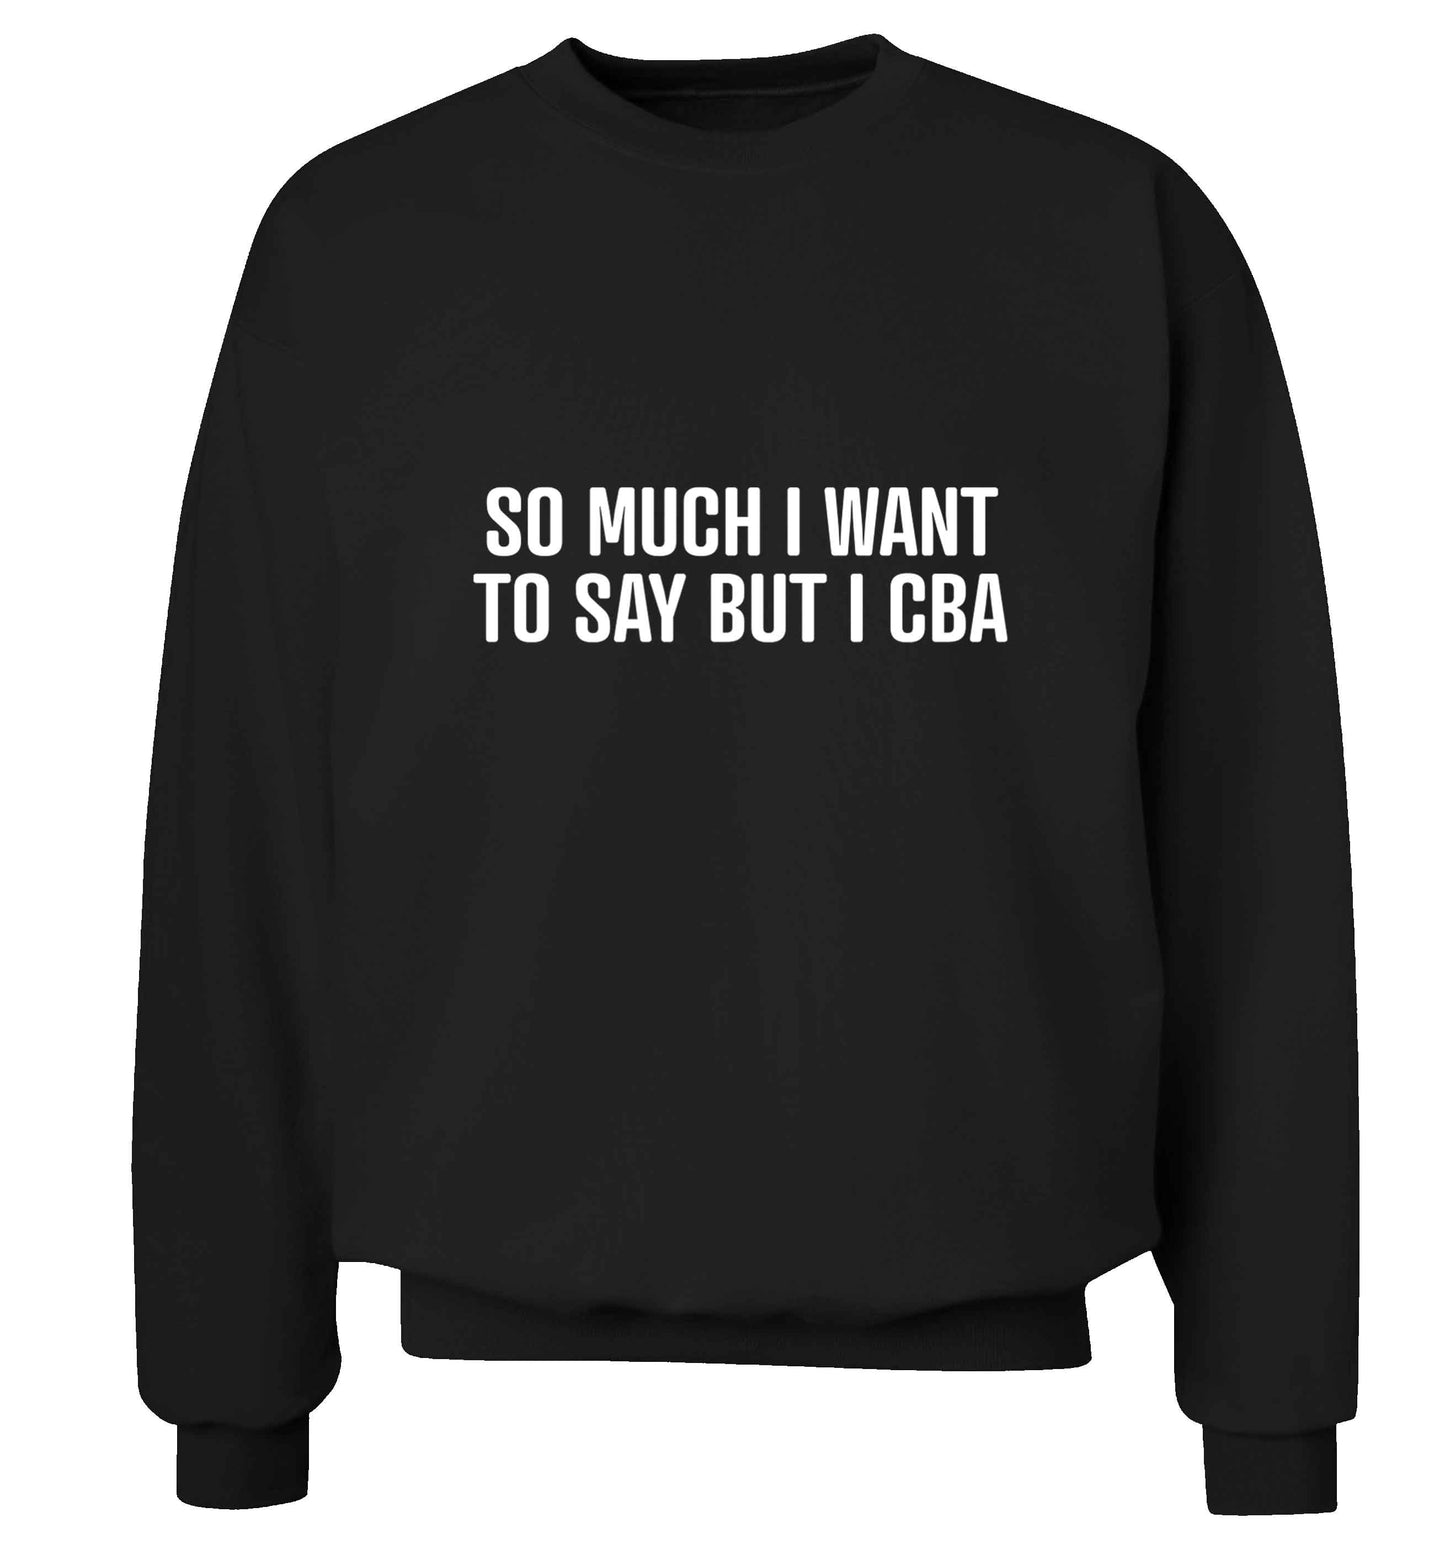 So much I want to say I cba  adult's unisex black sweater 2XL